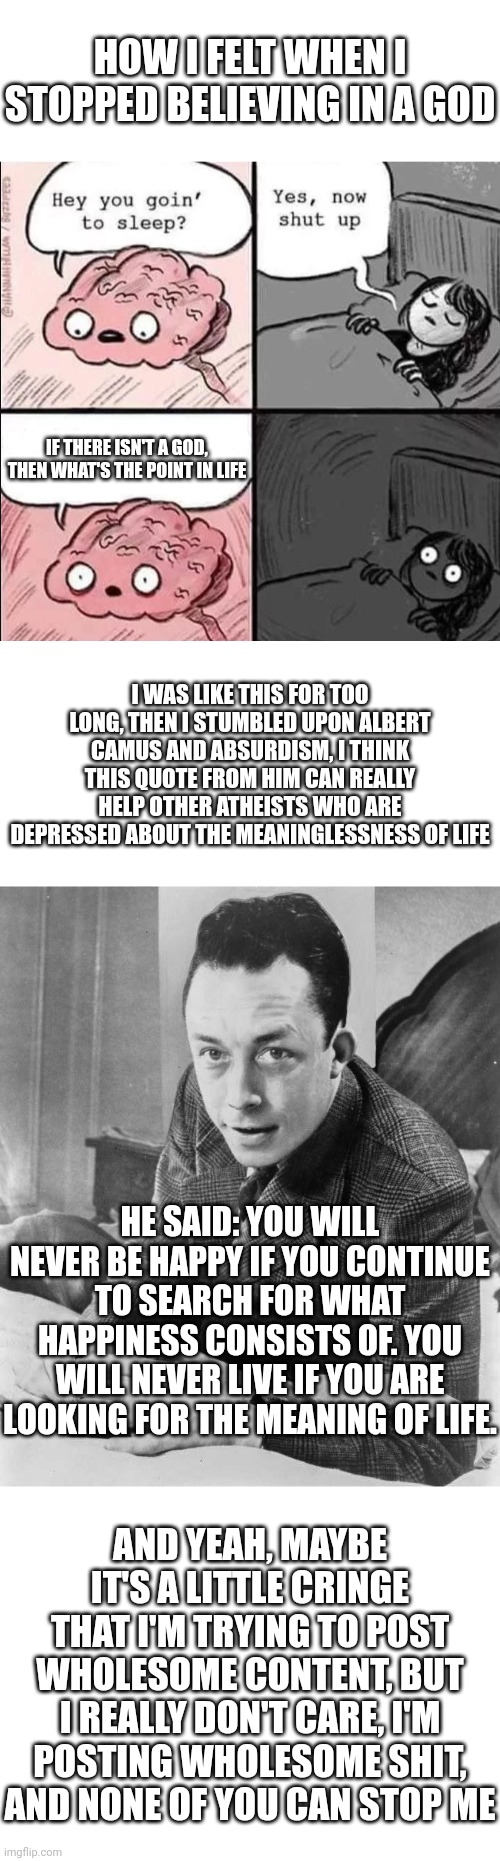 HOW I FELT WHEN I STOPPED BELIEVING IN A GOD; IF THERE ISN'T A GOD, THEN WHAT'S THE POINT IN LIFE; I WAS LIKE THIS FOR TOO LONG, THEN I STUMBLED UPON ALBERT CAMUS AND ABSURDISM, I THINK THIS QUOTE FROM HIM CAN REALLY HELP OTHER ATHEISTS WHO ARE DEPRESSED ABOUT THE MEANINGLESSNESS OF LIFE; HE SAID: YOU WILL NEVER BE HAPPY IF YOU CONTINUE TO SEARCH FOR WHAT HAPPINESS CONSISTS OF. YOU WILL NEVER LIVE IF YOU ARE LOOKING FOR THE MEANING OF LIFE. AND YEAH, MAYBE IT'S A LITTLE CRINGE THAT I'M TRYING TO POST WHOLESOME CONTENT, BUT I REALLY DON'T CARE, I'M POSTING WHOLESOME SHIT, AND NONE OF YOU CAN STOP ME | image tagged in blank white template,waking up brain | made w/ Imgflip meme maker